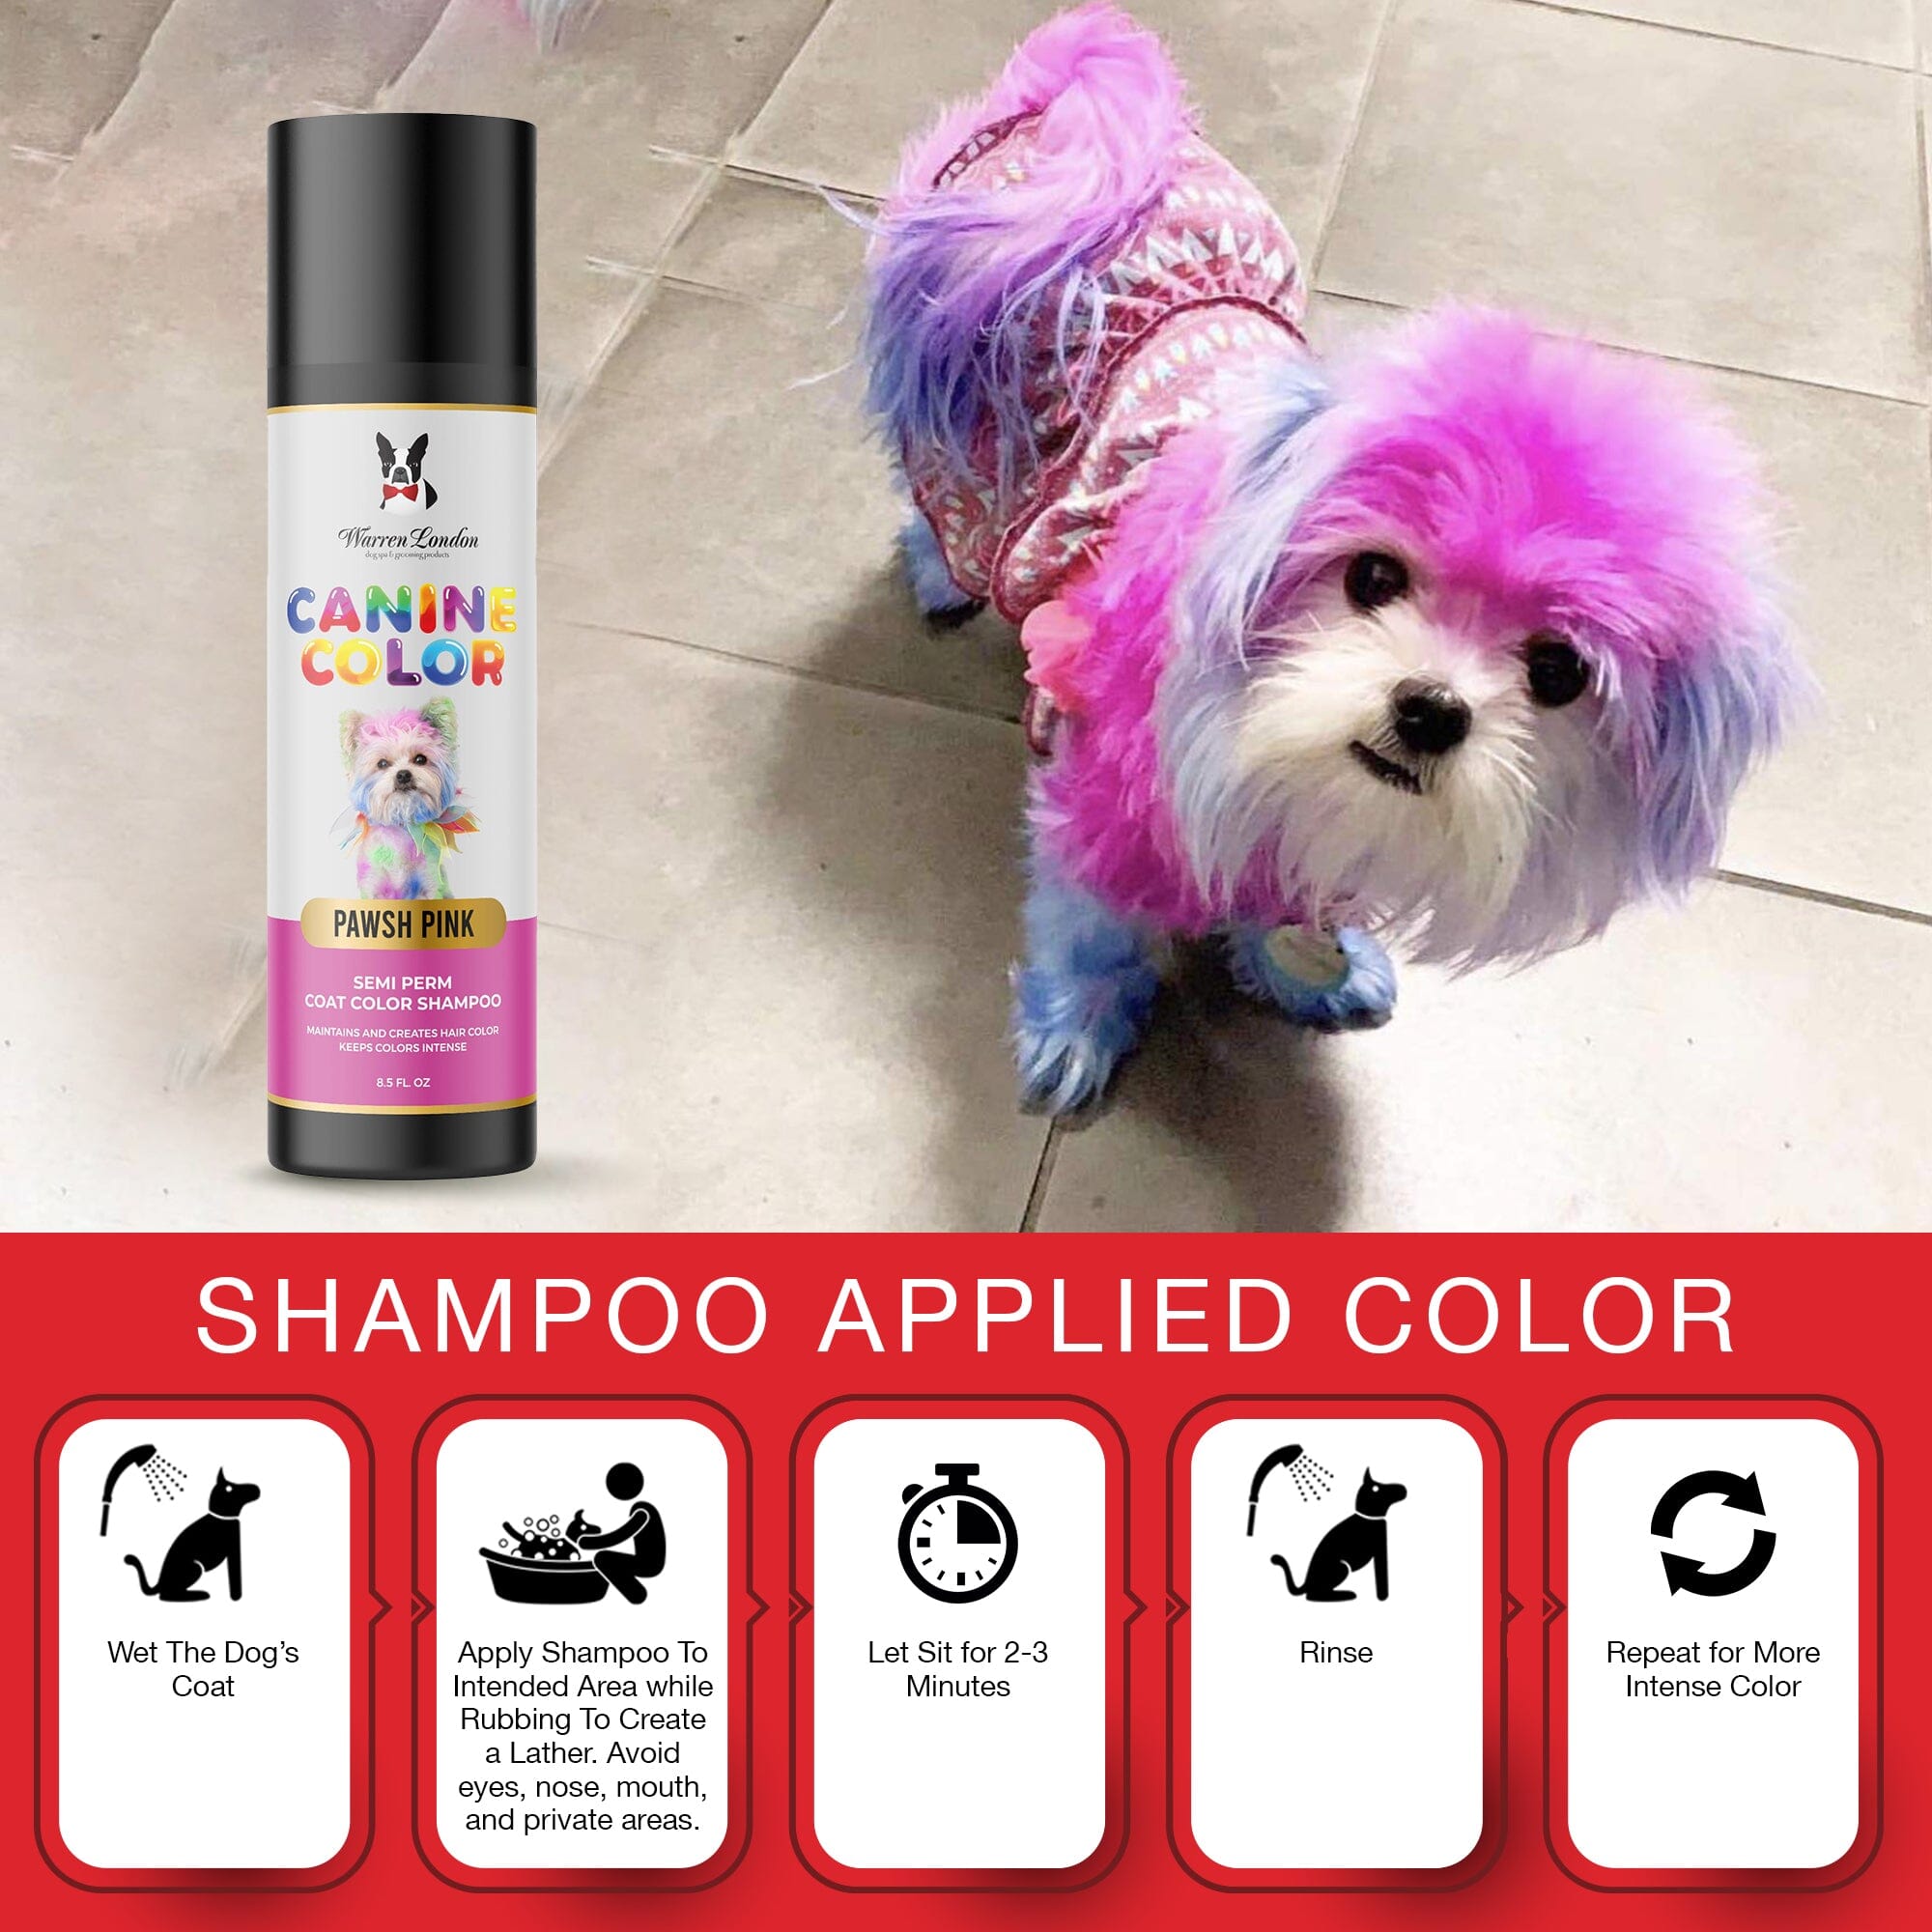 Canine Color Semi Perm Coat Color Shampoo for Dogs Spa Product Warren London 